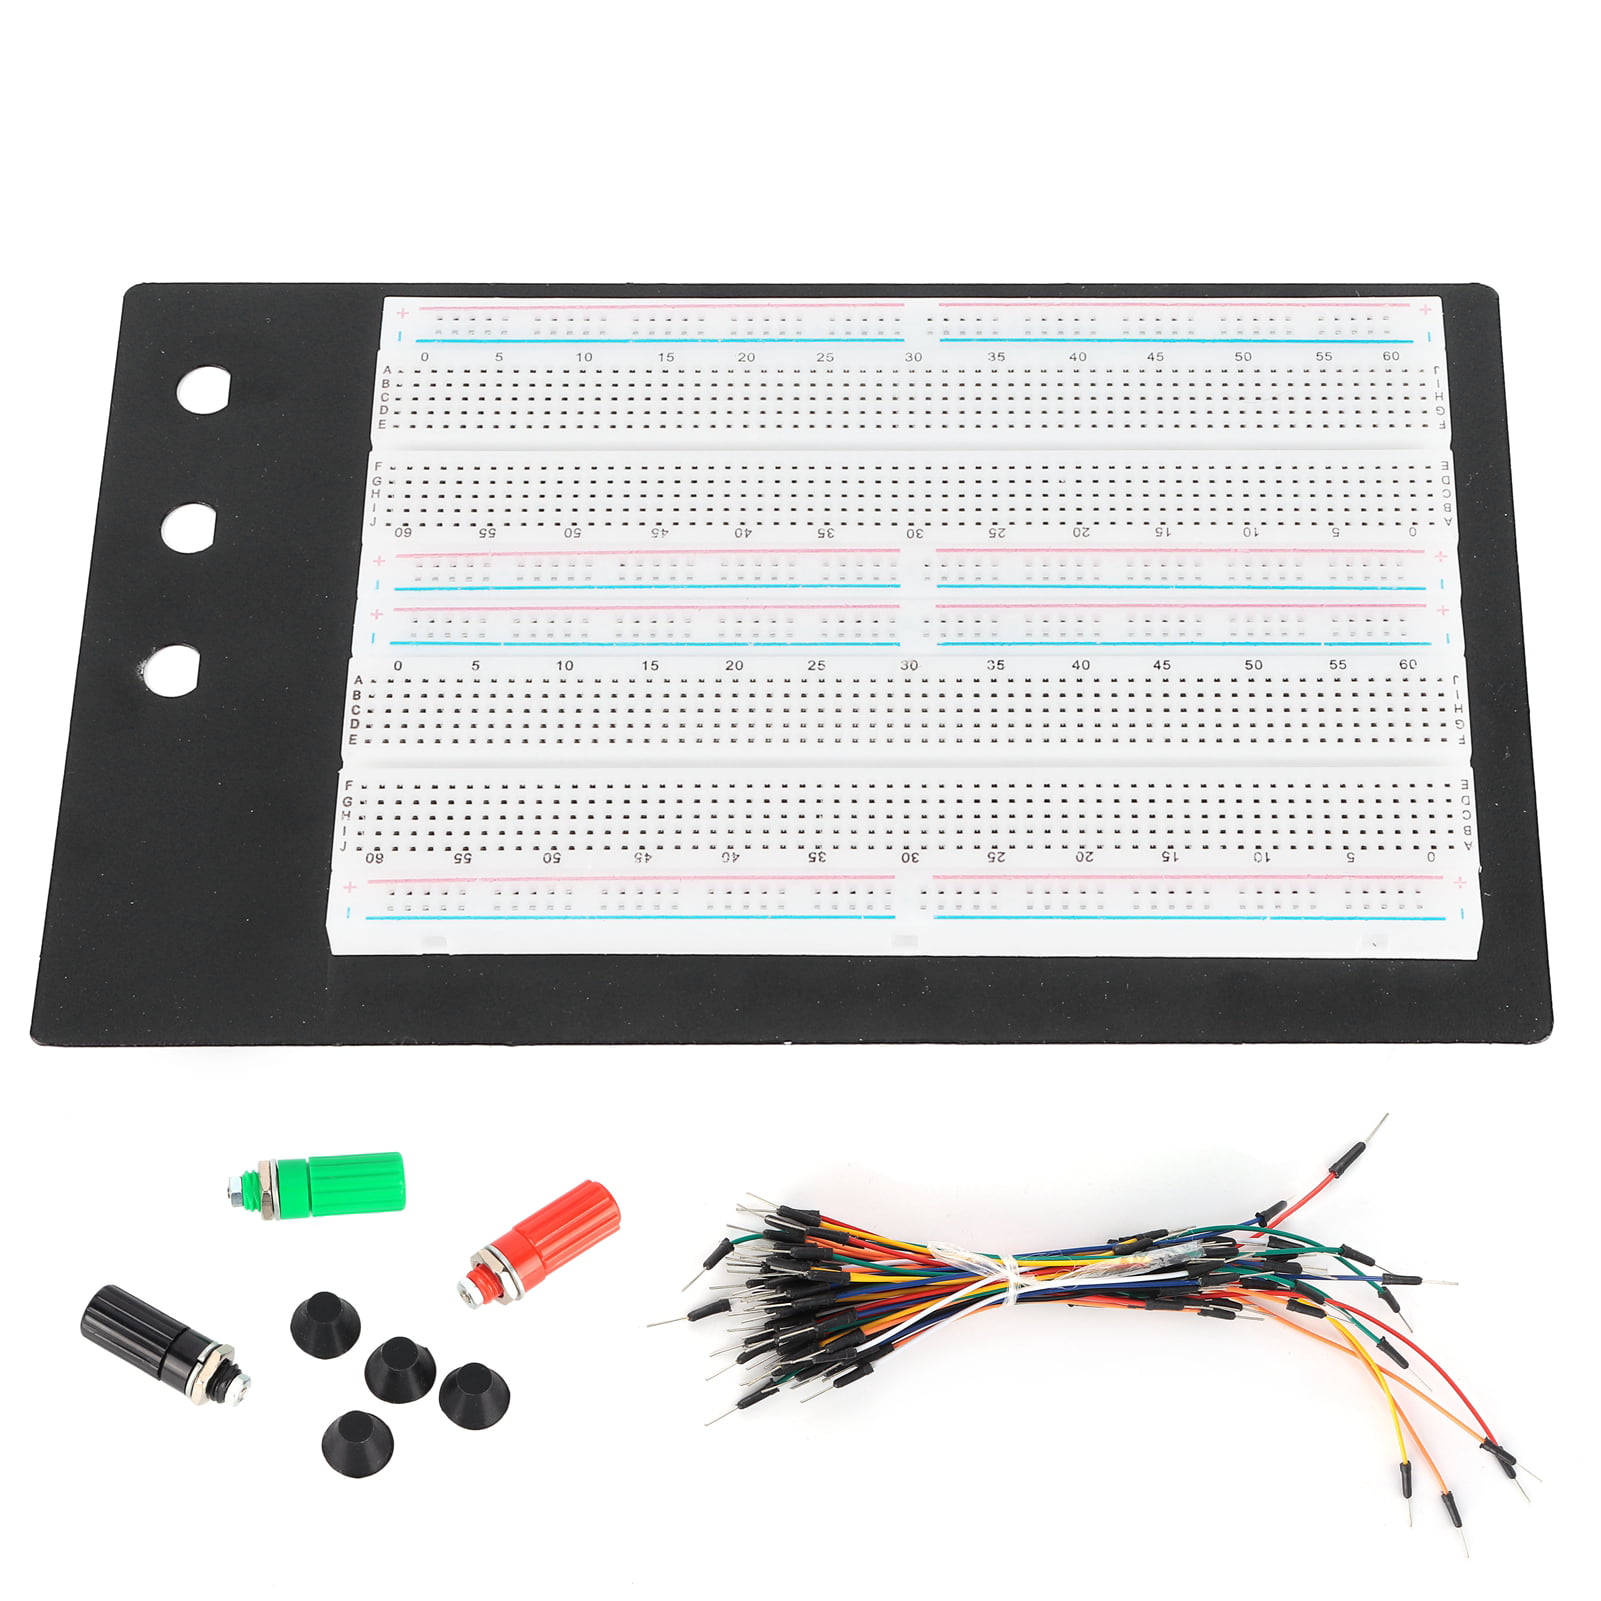 3742 Total Contact Points PLUS JW-350 with 350 Pre-Formed Jumper Wires Elenco Breadboard Make DIY 9480WK High School College Prototyping Projects Easier